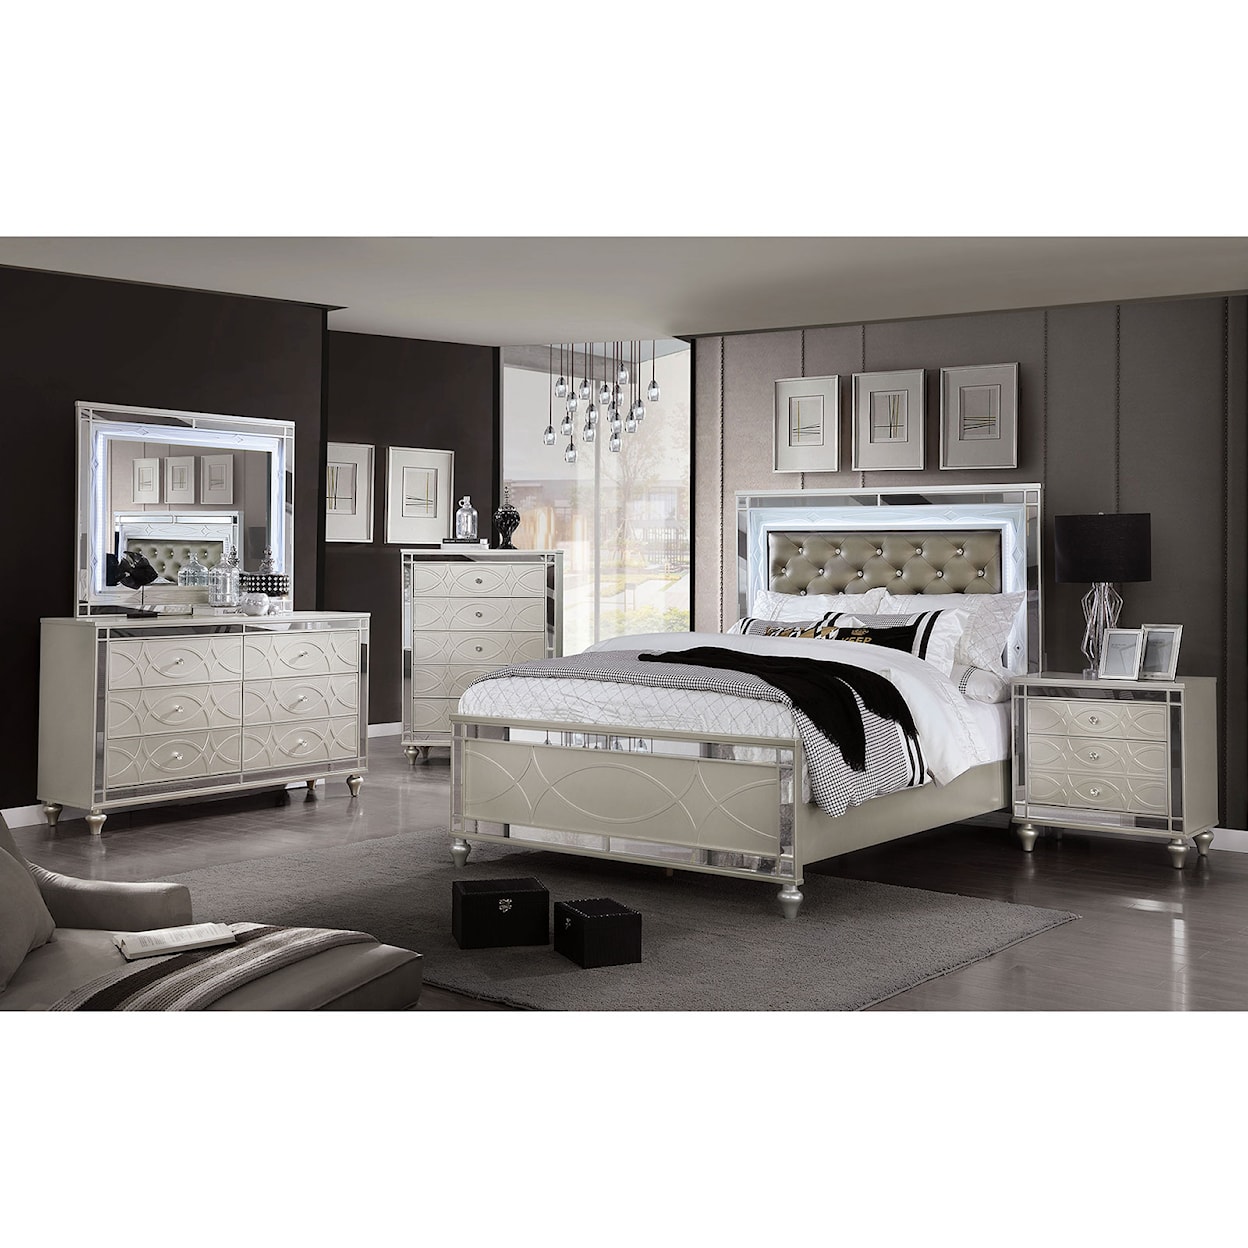 Furniture of America Manar 5 Pc. Queen Bedroom Set w/ Night Stand